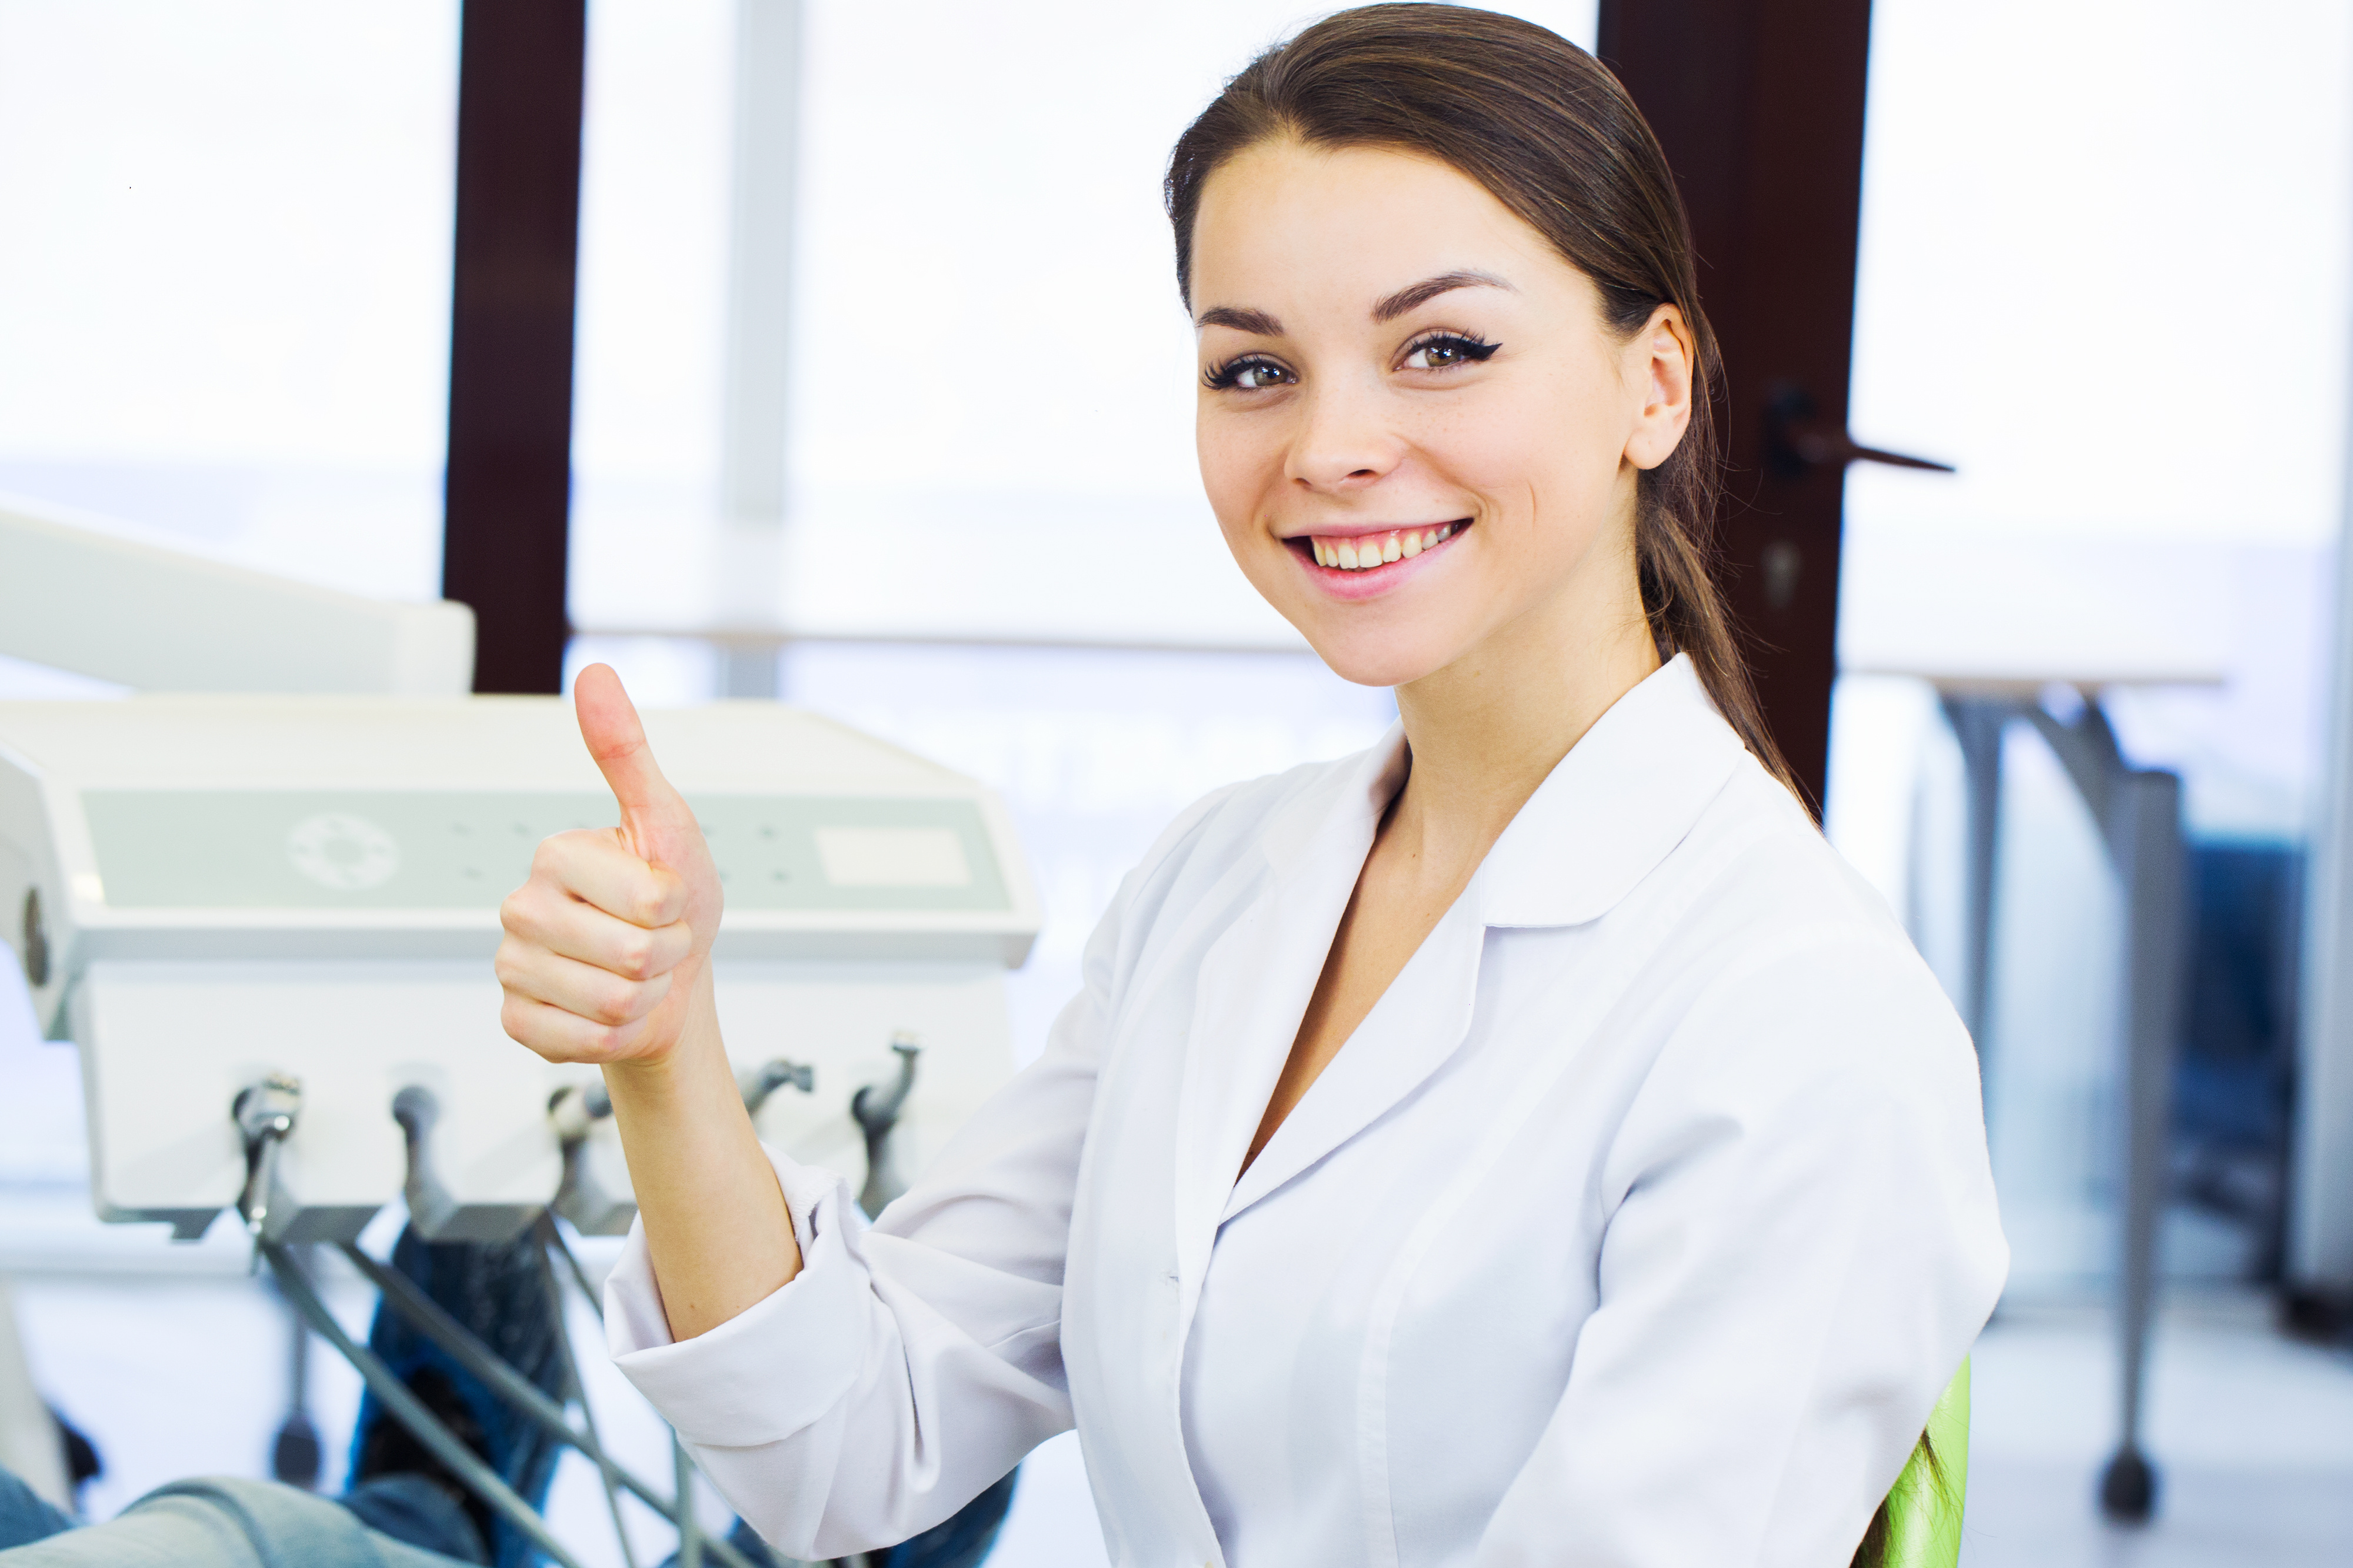 AdobeStock_106003300 - young business woman thumbs up